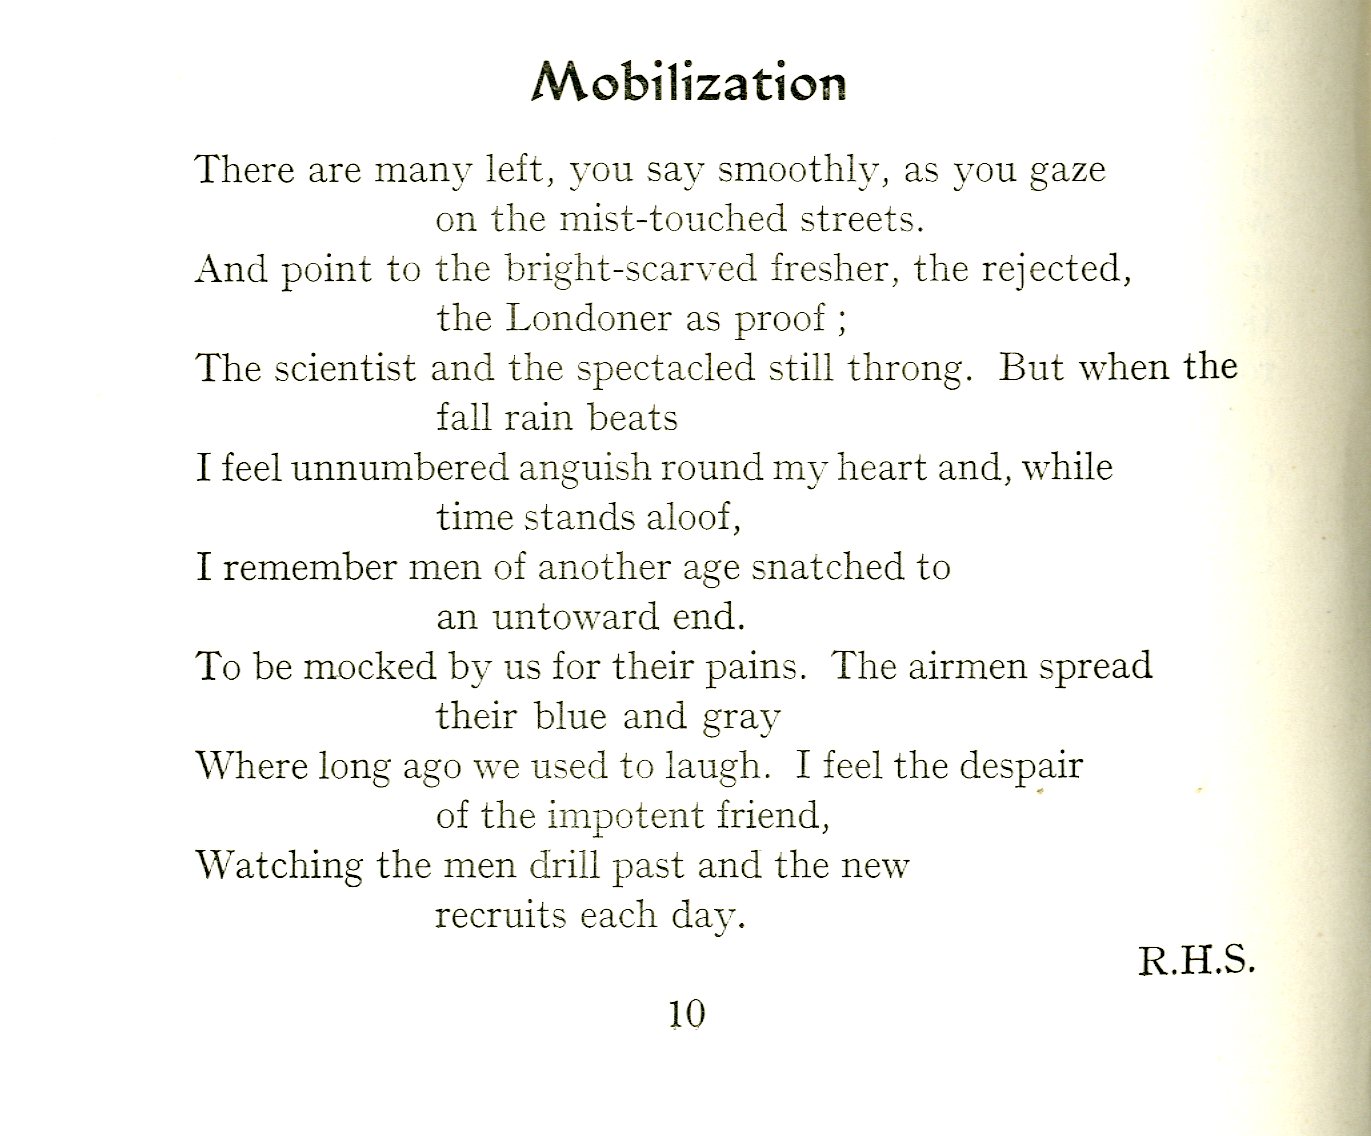 'Mobilization' from Michaelmas 1939 edition of Chanticlere